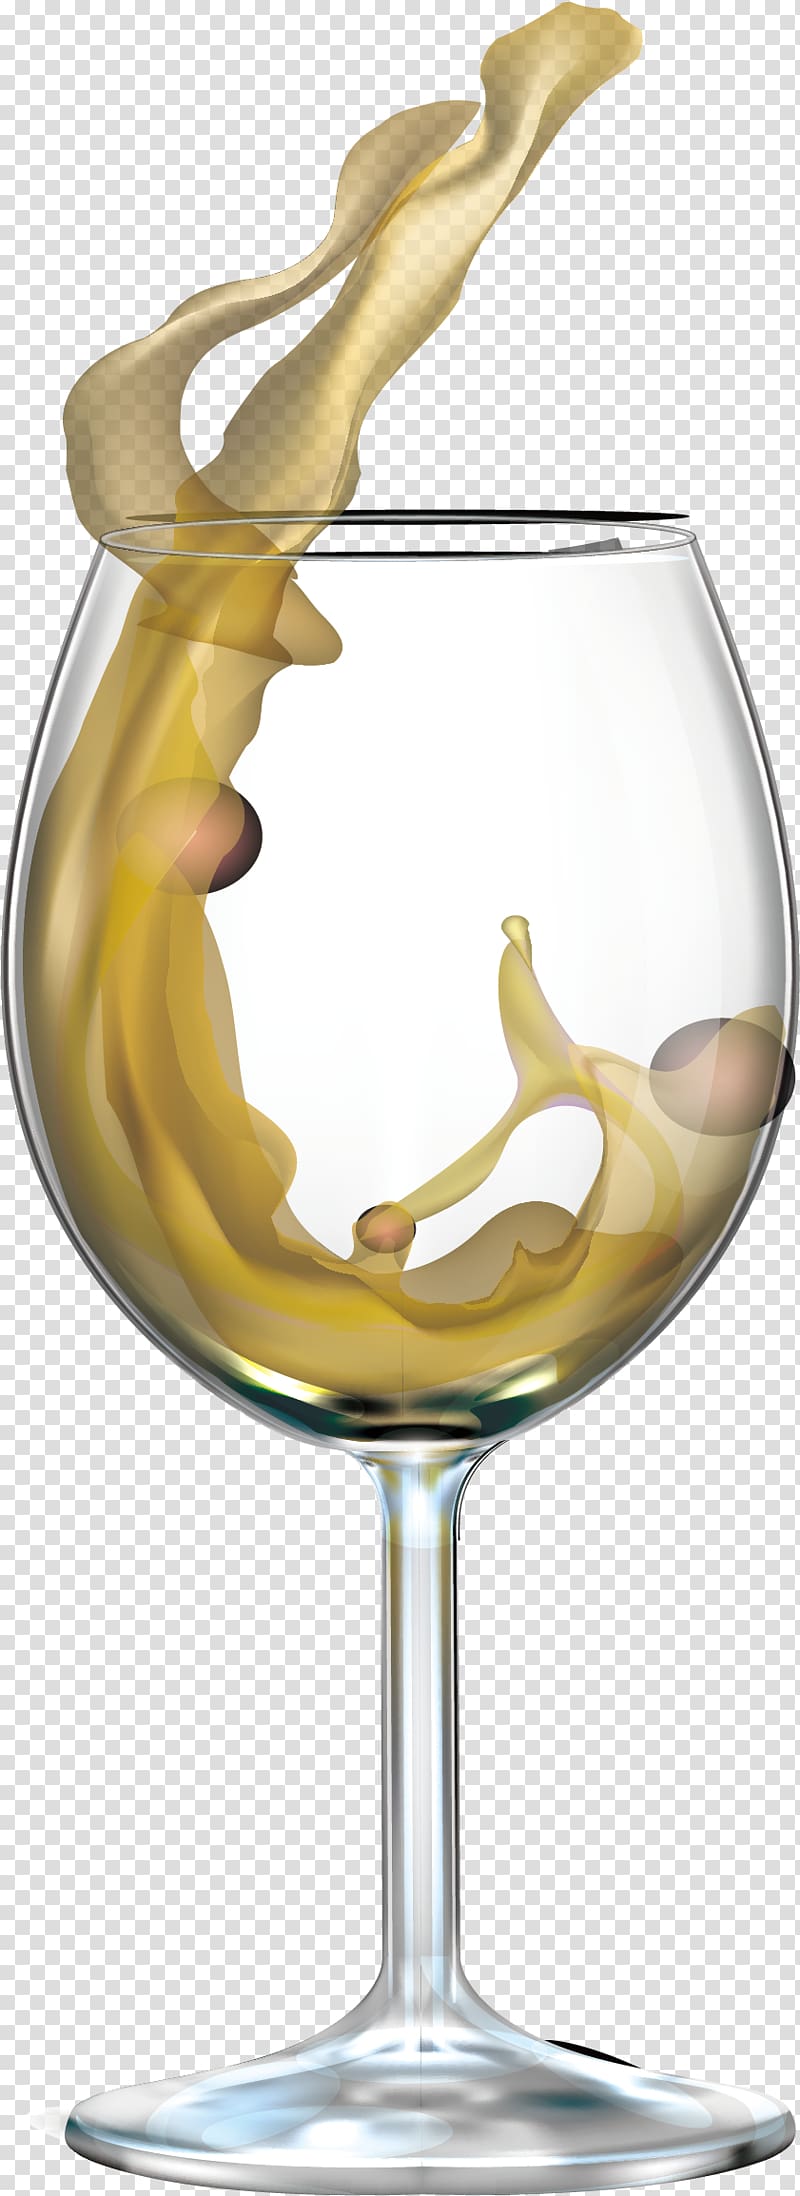 Wine glass Transparency and translucency, glass transparent background PNG clipart